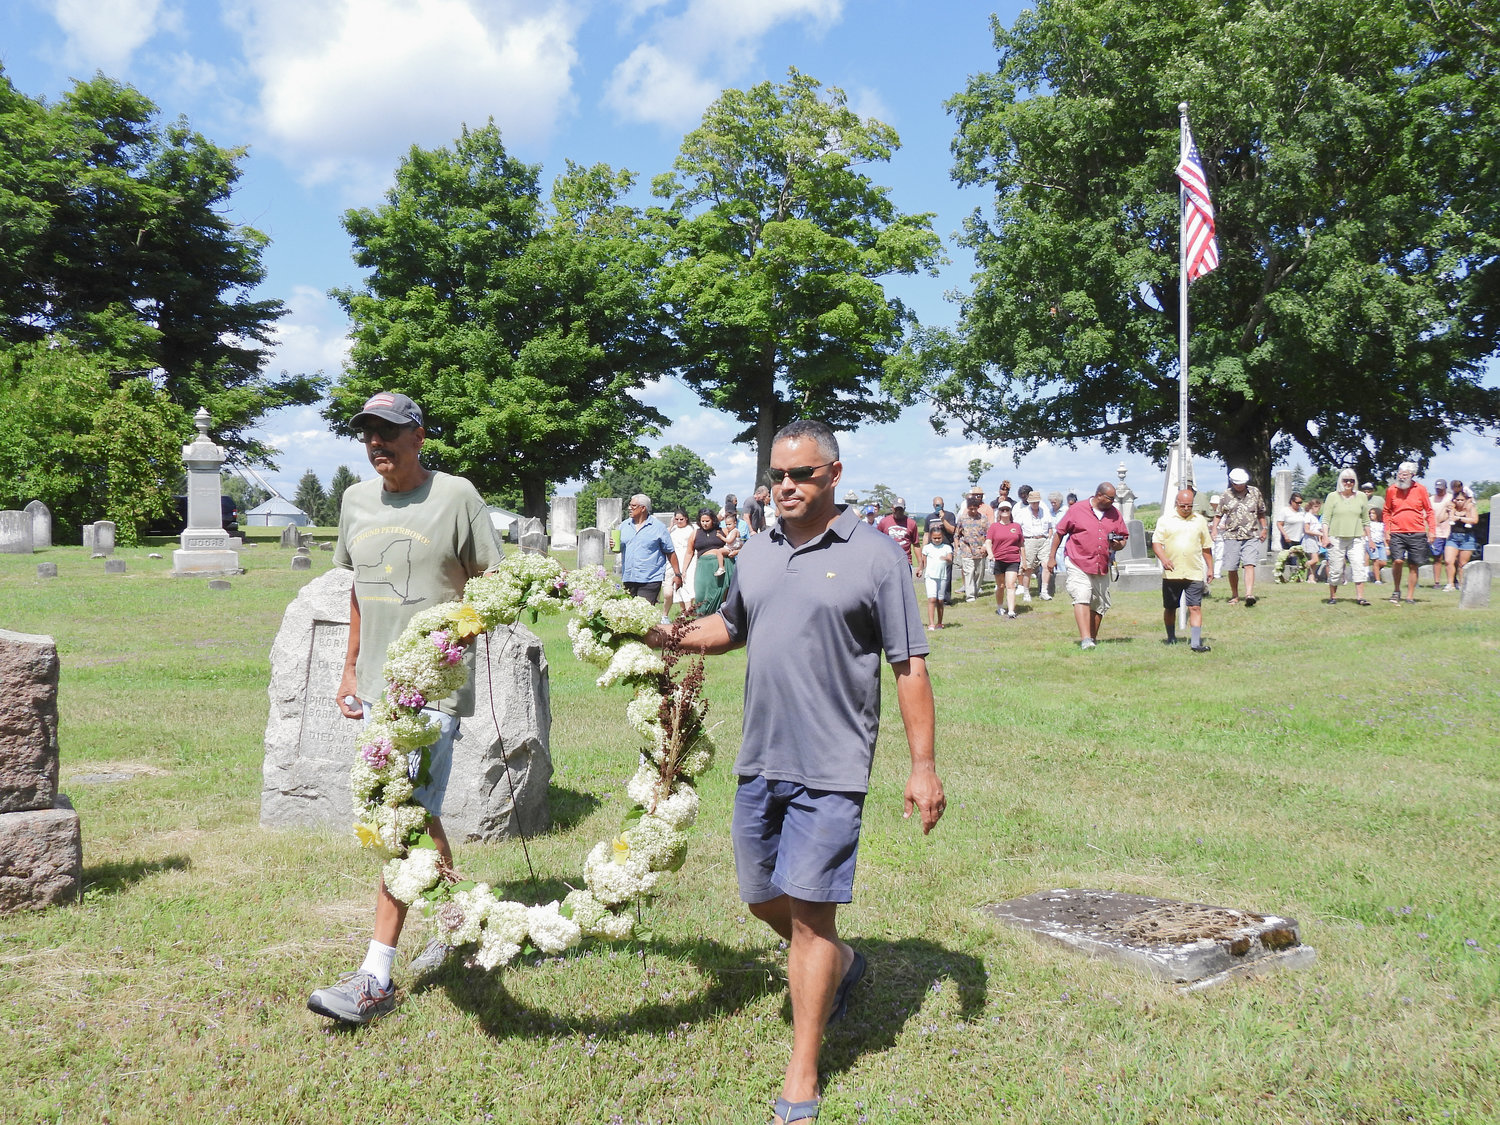 Emancipation Day Co-Chair James Corpin, left, and Jacob Donovan-Colin carry a wreath to Harriet Russell’s grave at Peterboro Cemetery as part of the annual Emancipation Day celebration on Saturday.